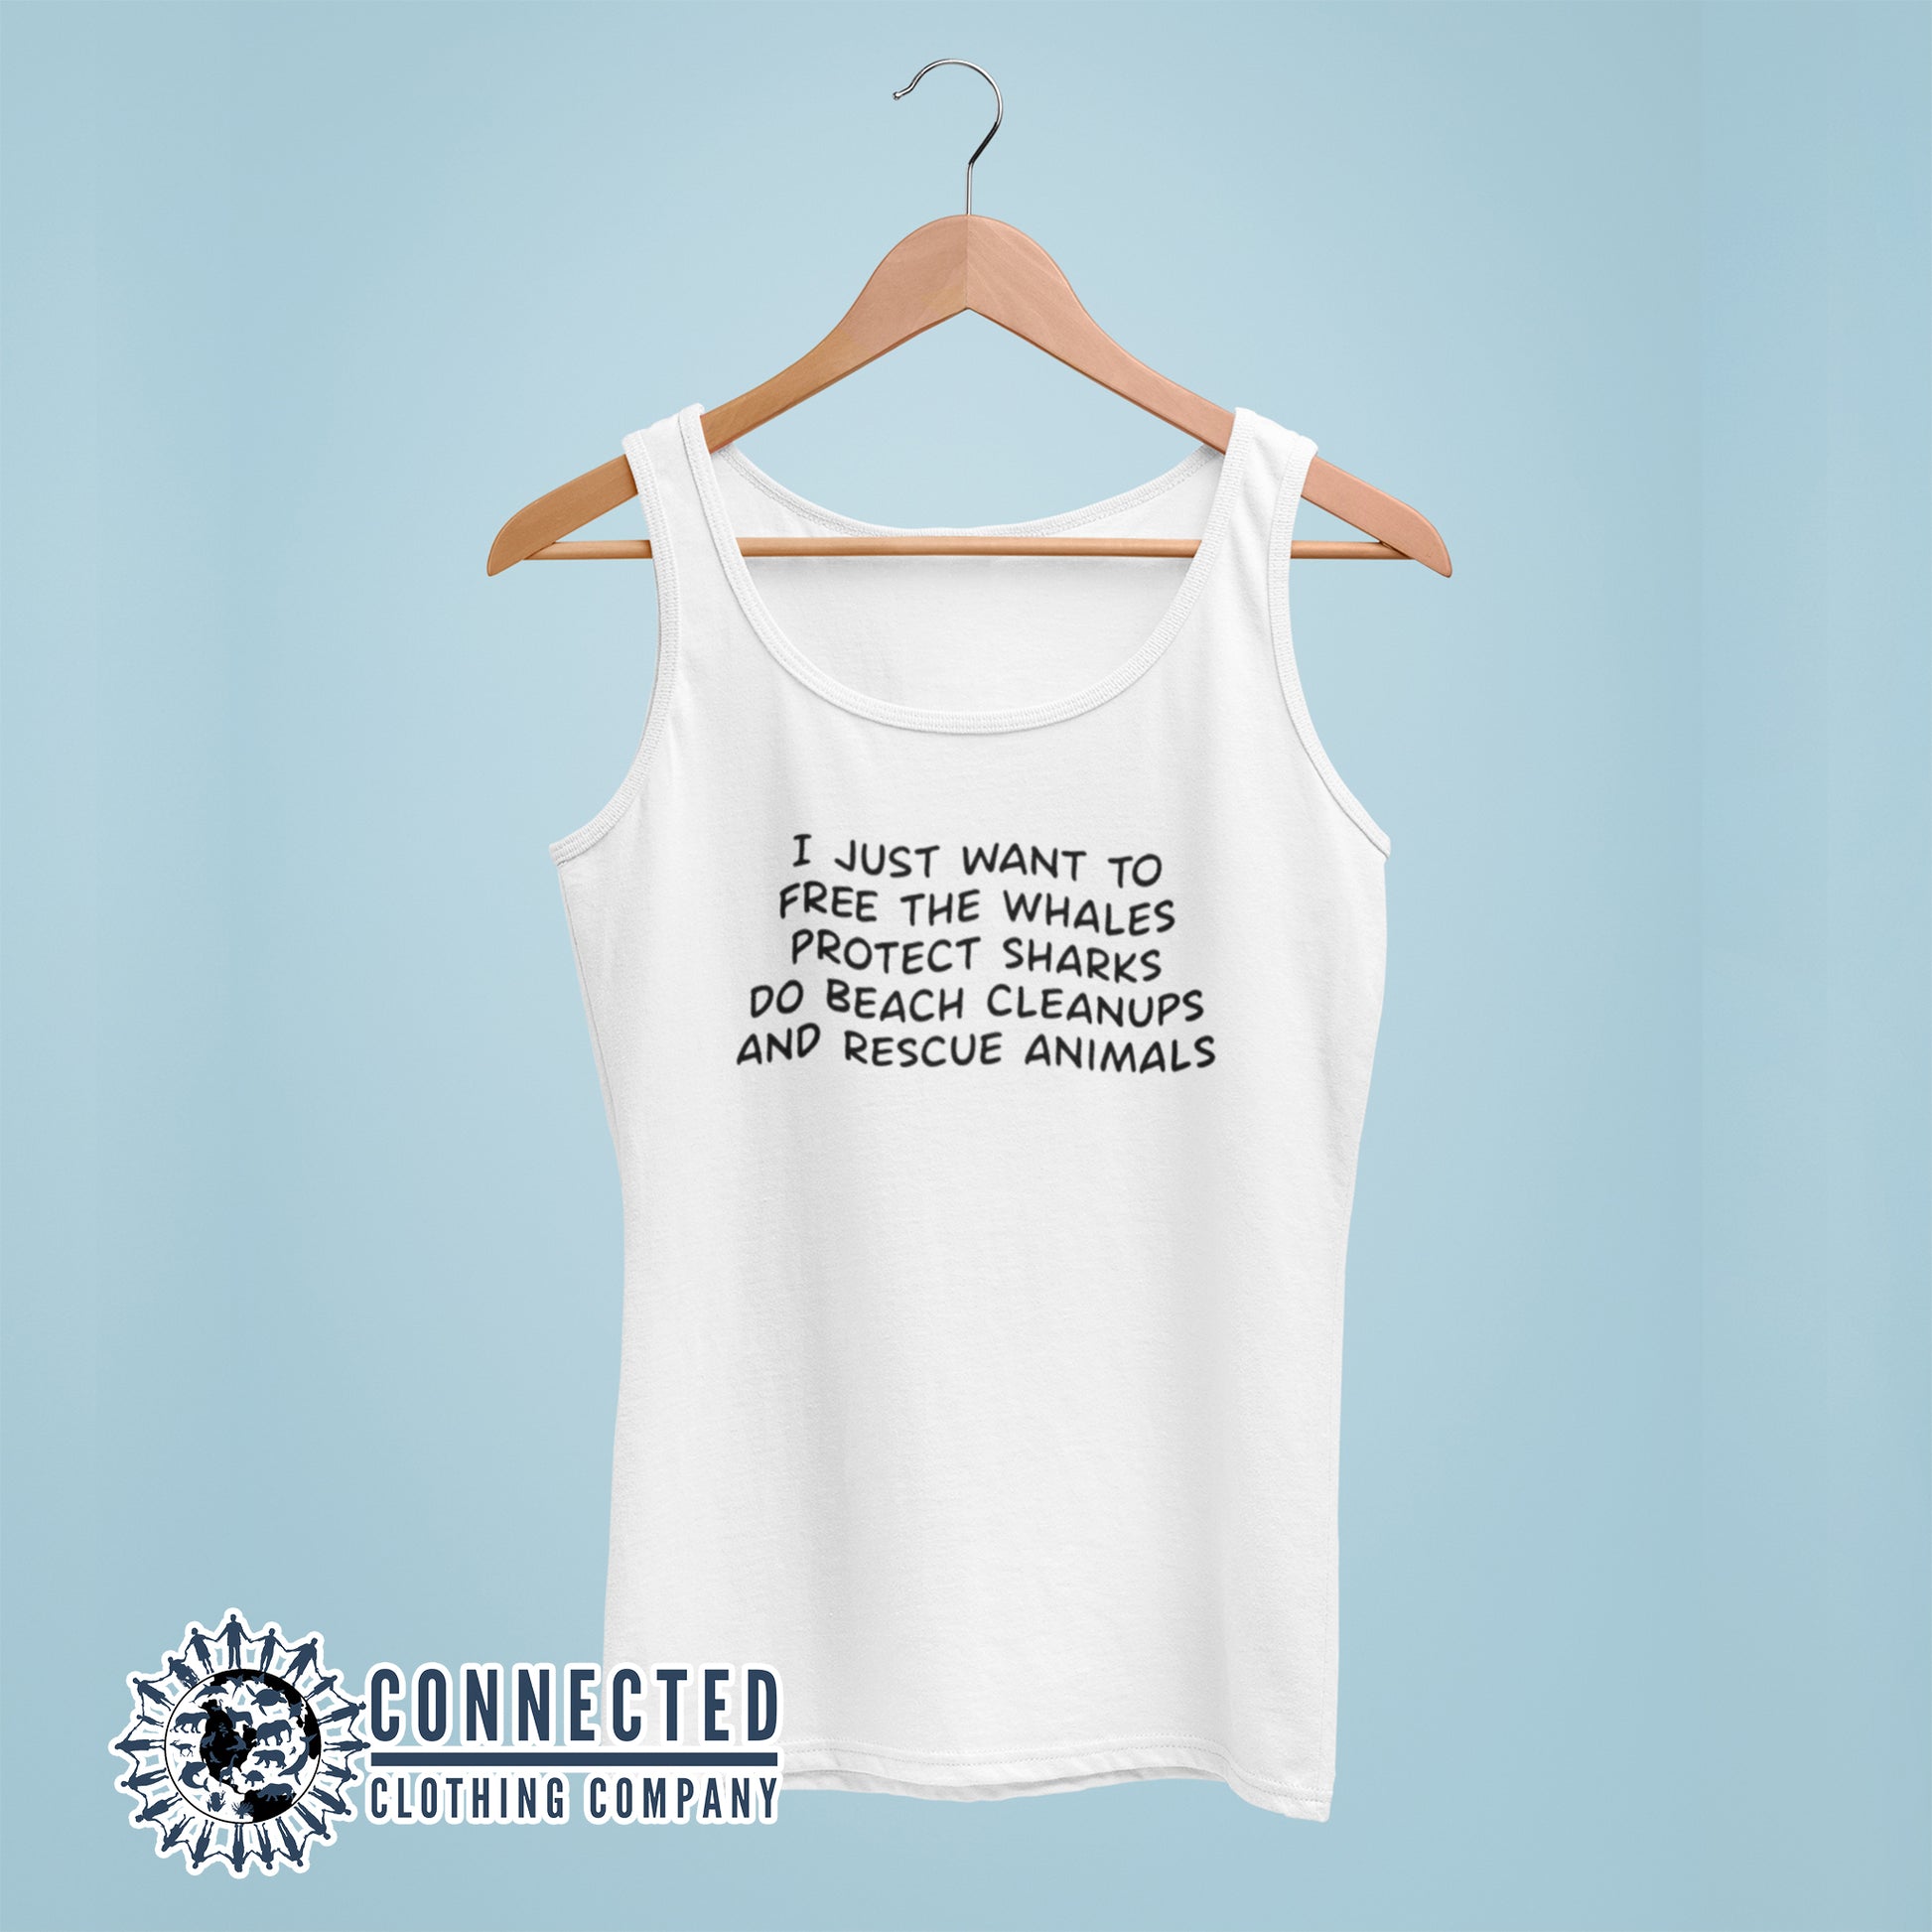 White I Just Want To Save The World Women's Tank Top reads "I just want to free the whales, protect sharks, do beach cleanups, and rescue animals" - Connected Clothing Company - 10% of profits donated to Mission Blue ocean conservation